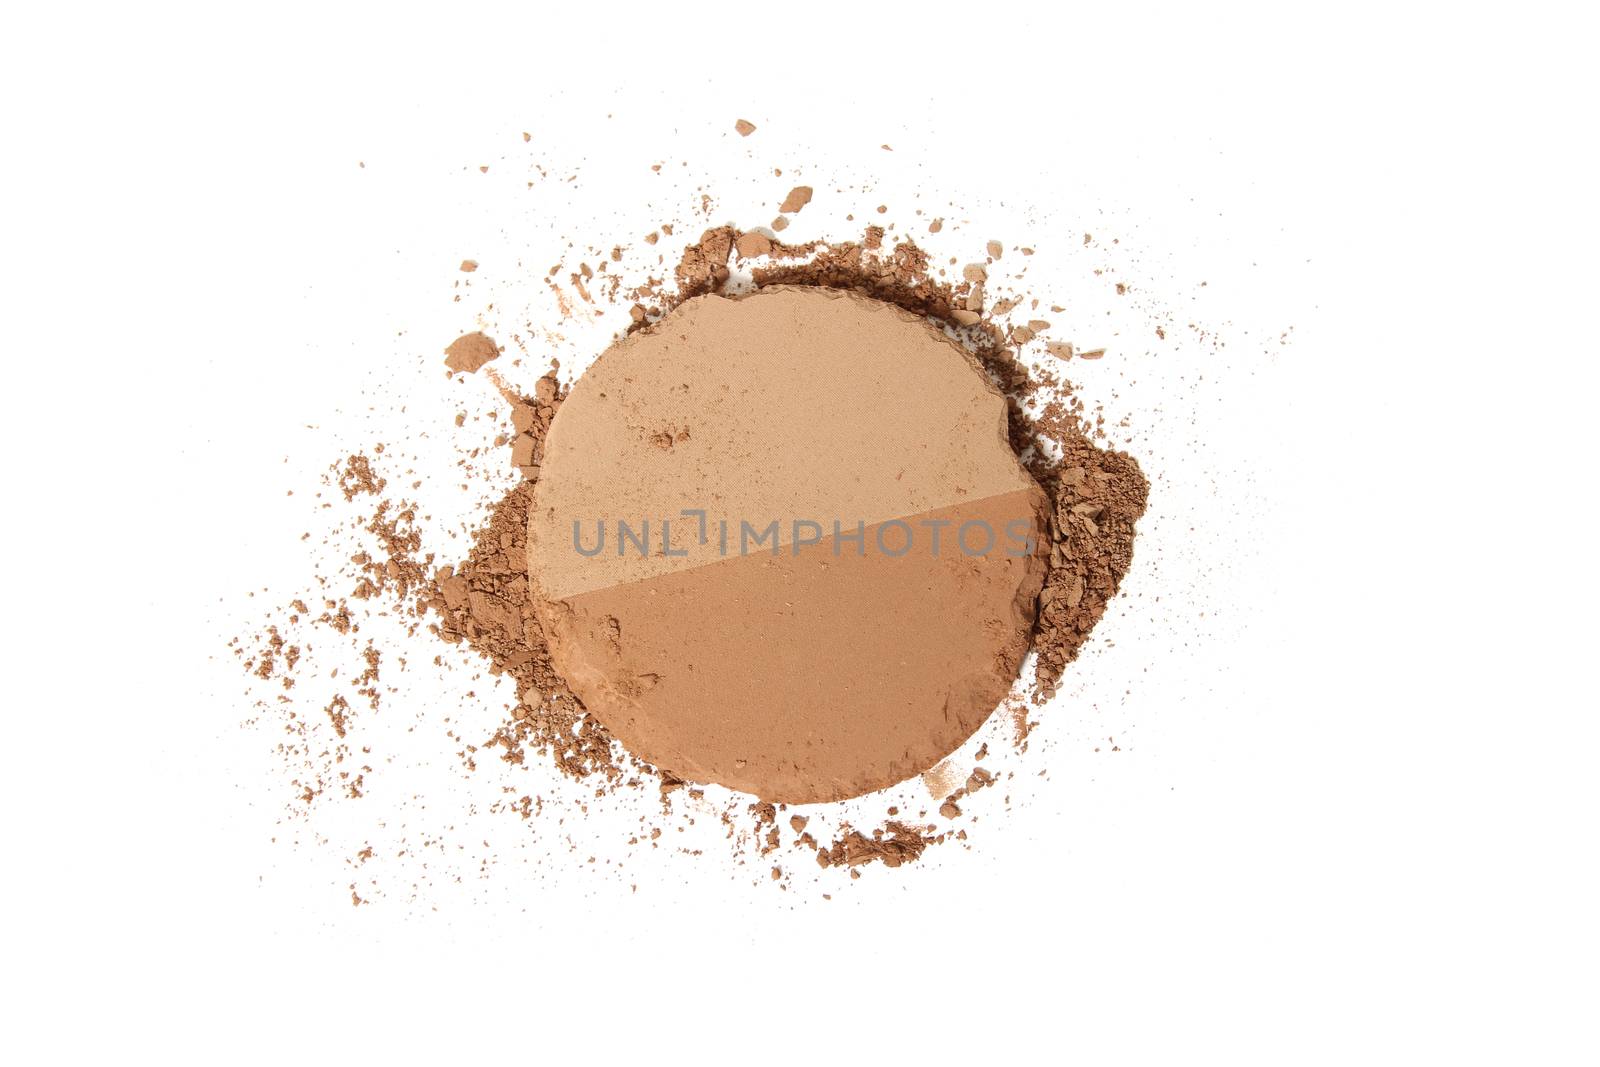 Broken Bronzer or Contour Powder With Brush on White by Marti157900